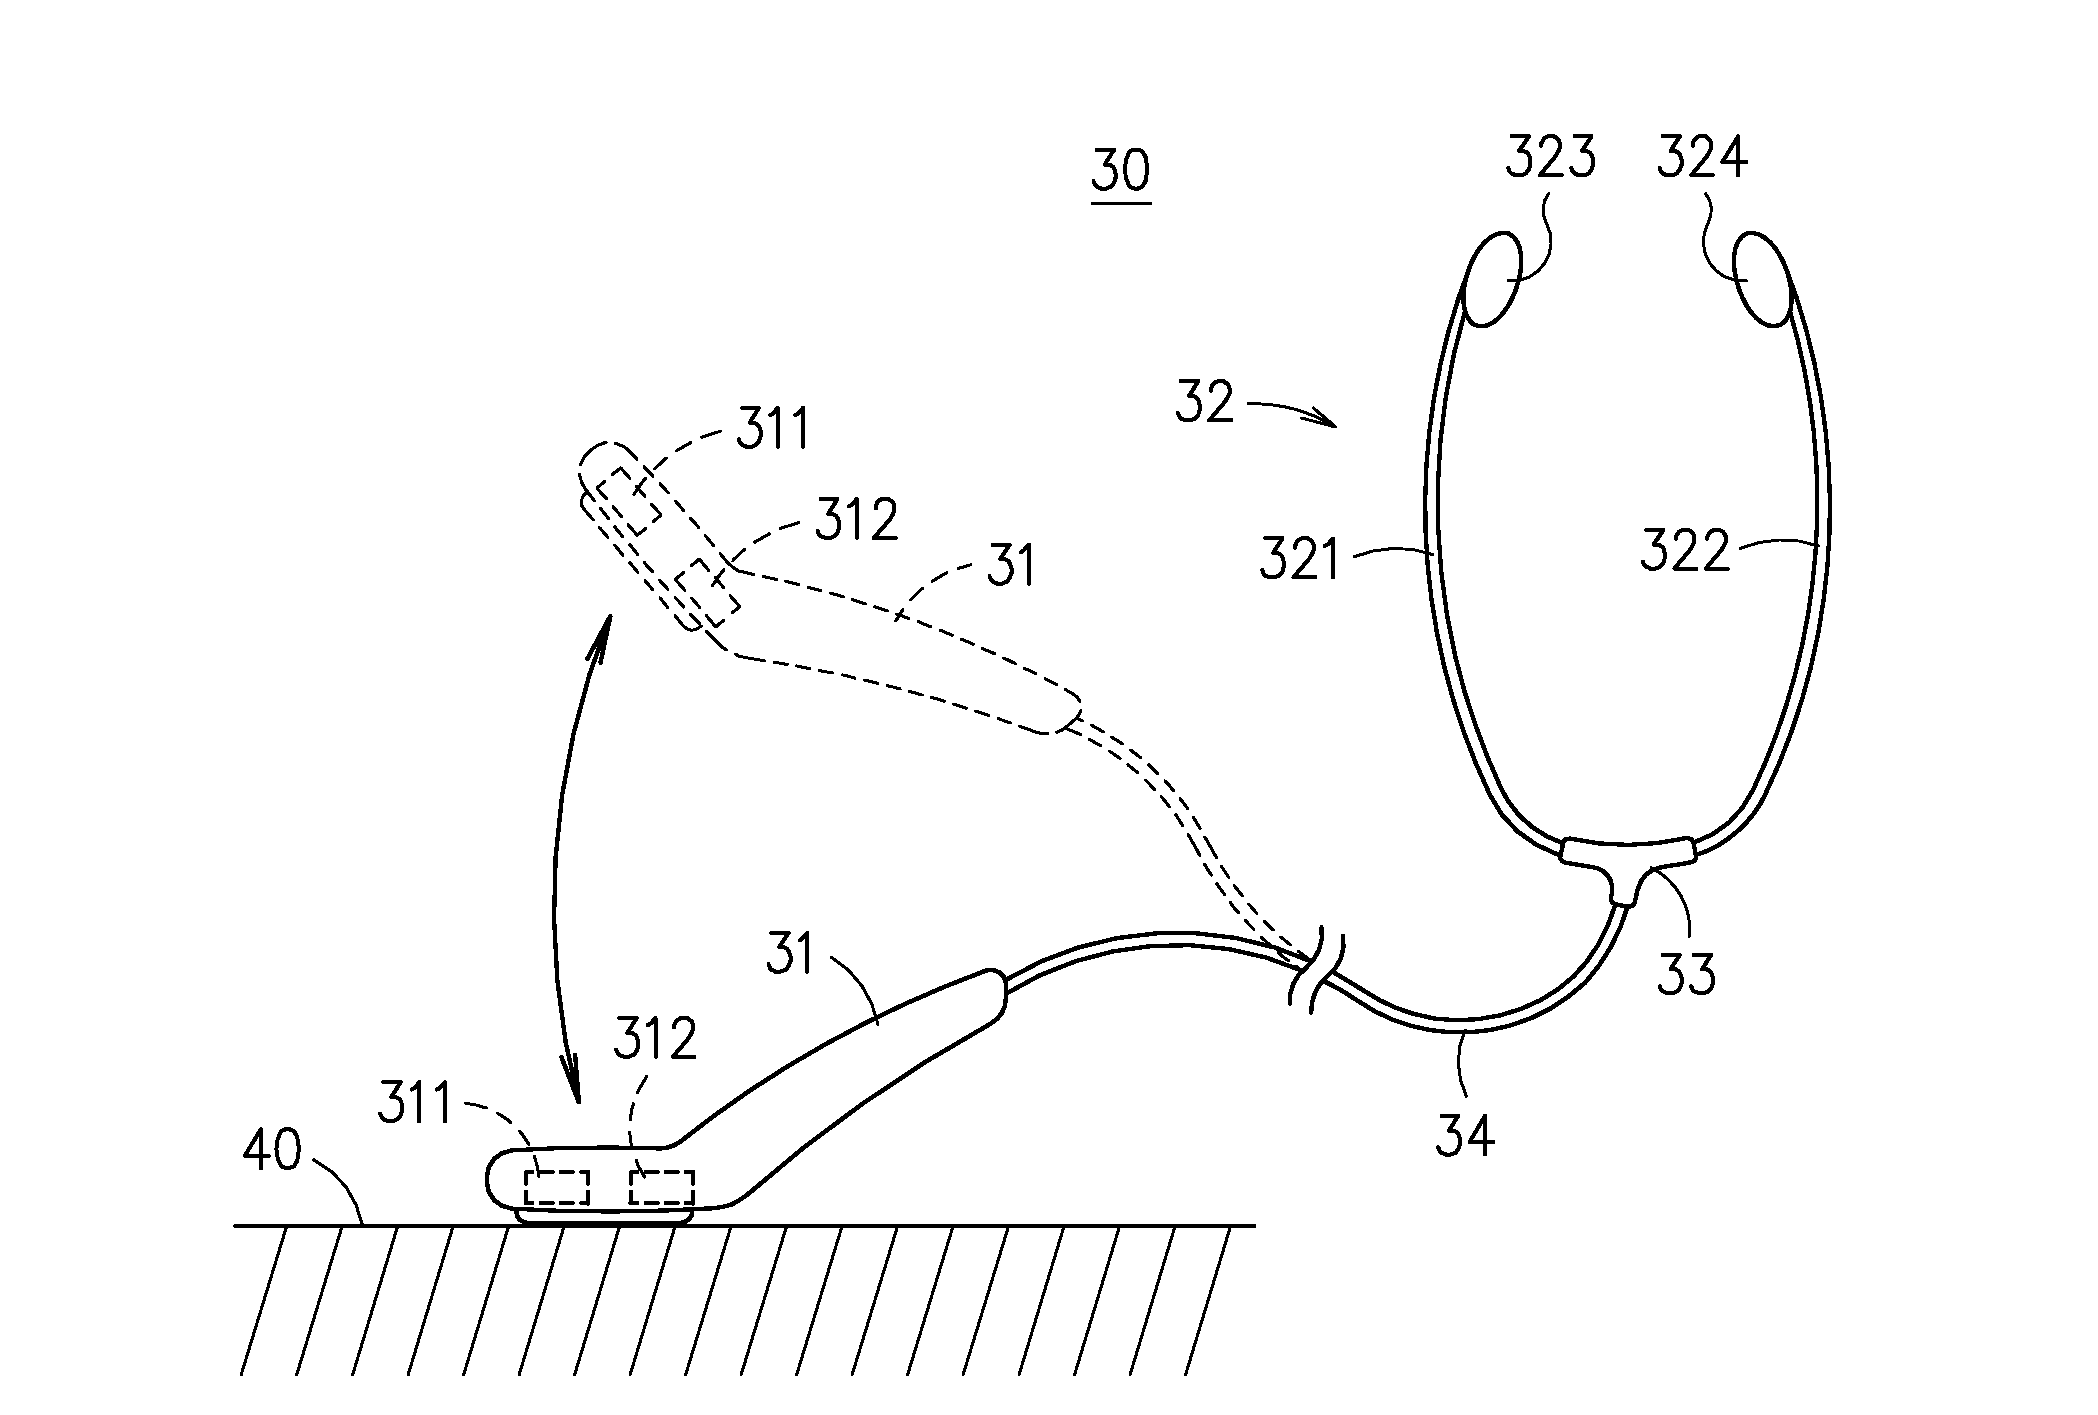 Electronic stethoscope and the stepthoscope auscultation method using the same